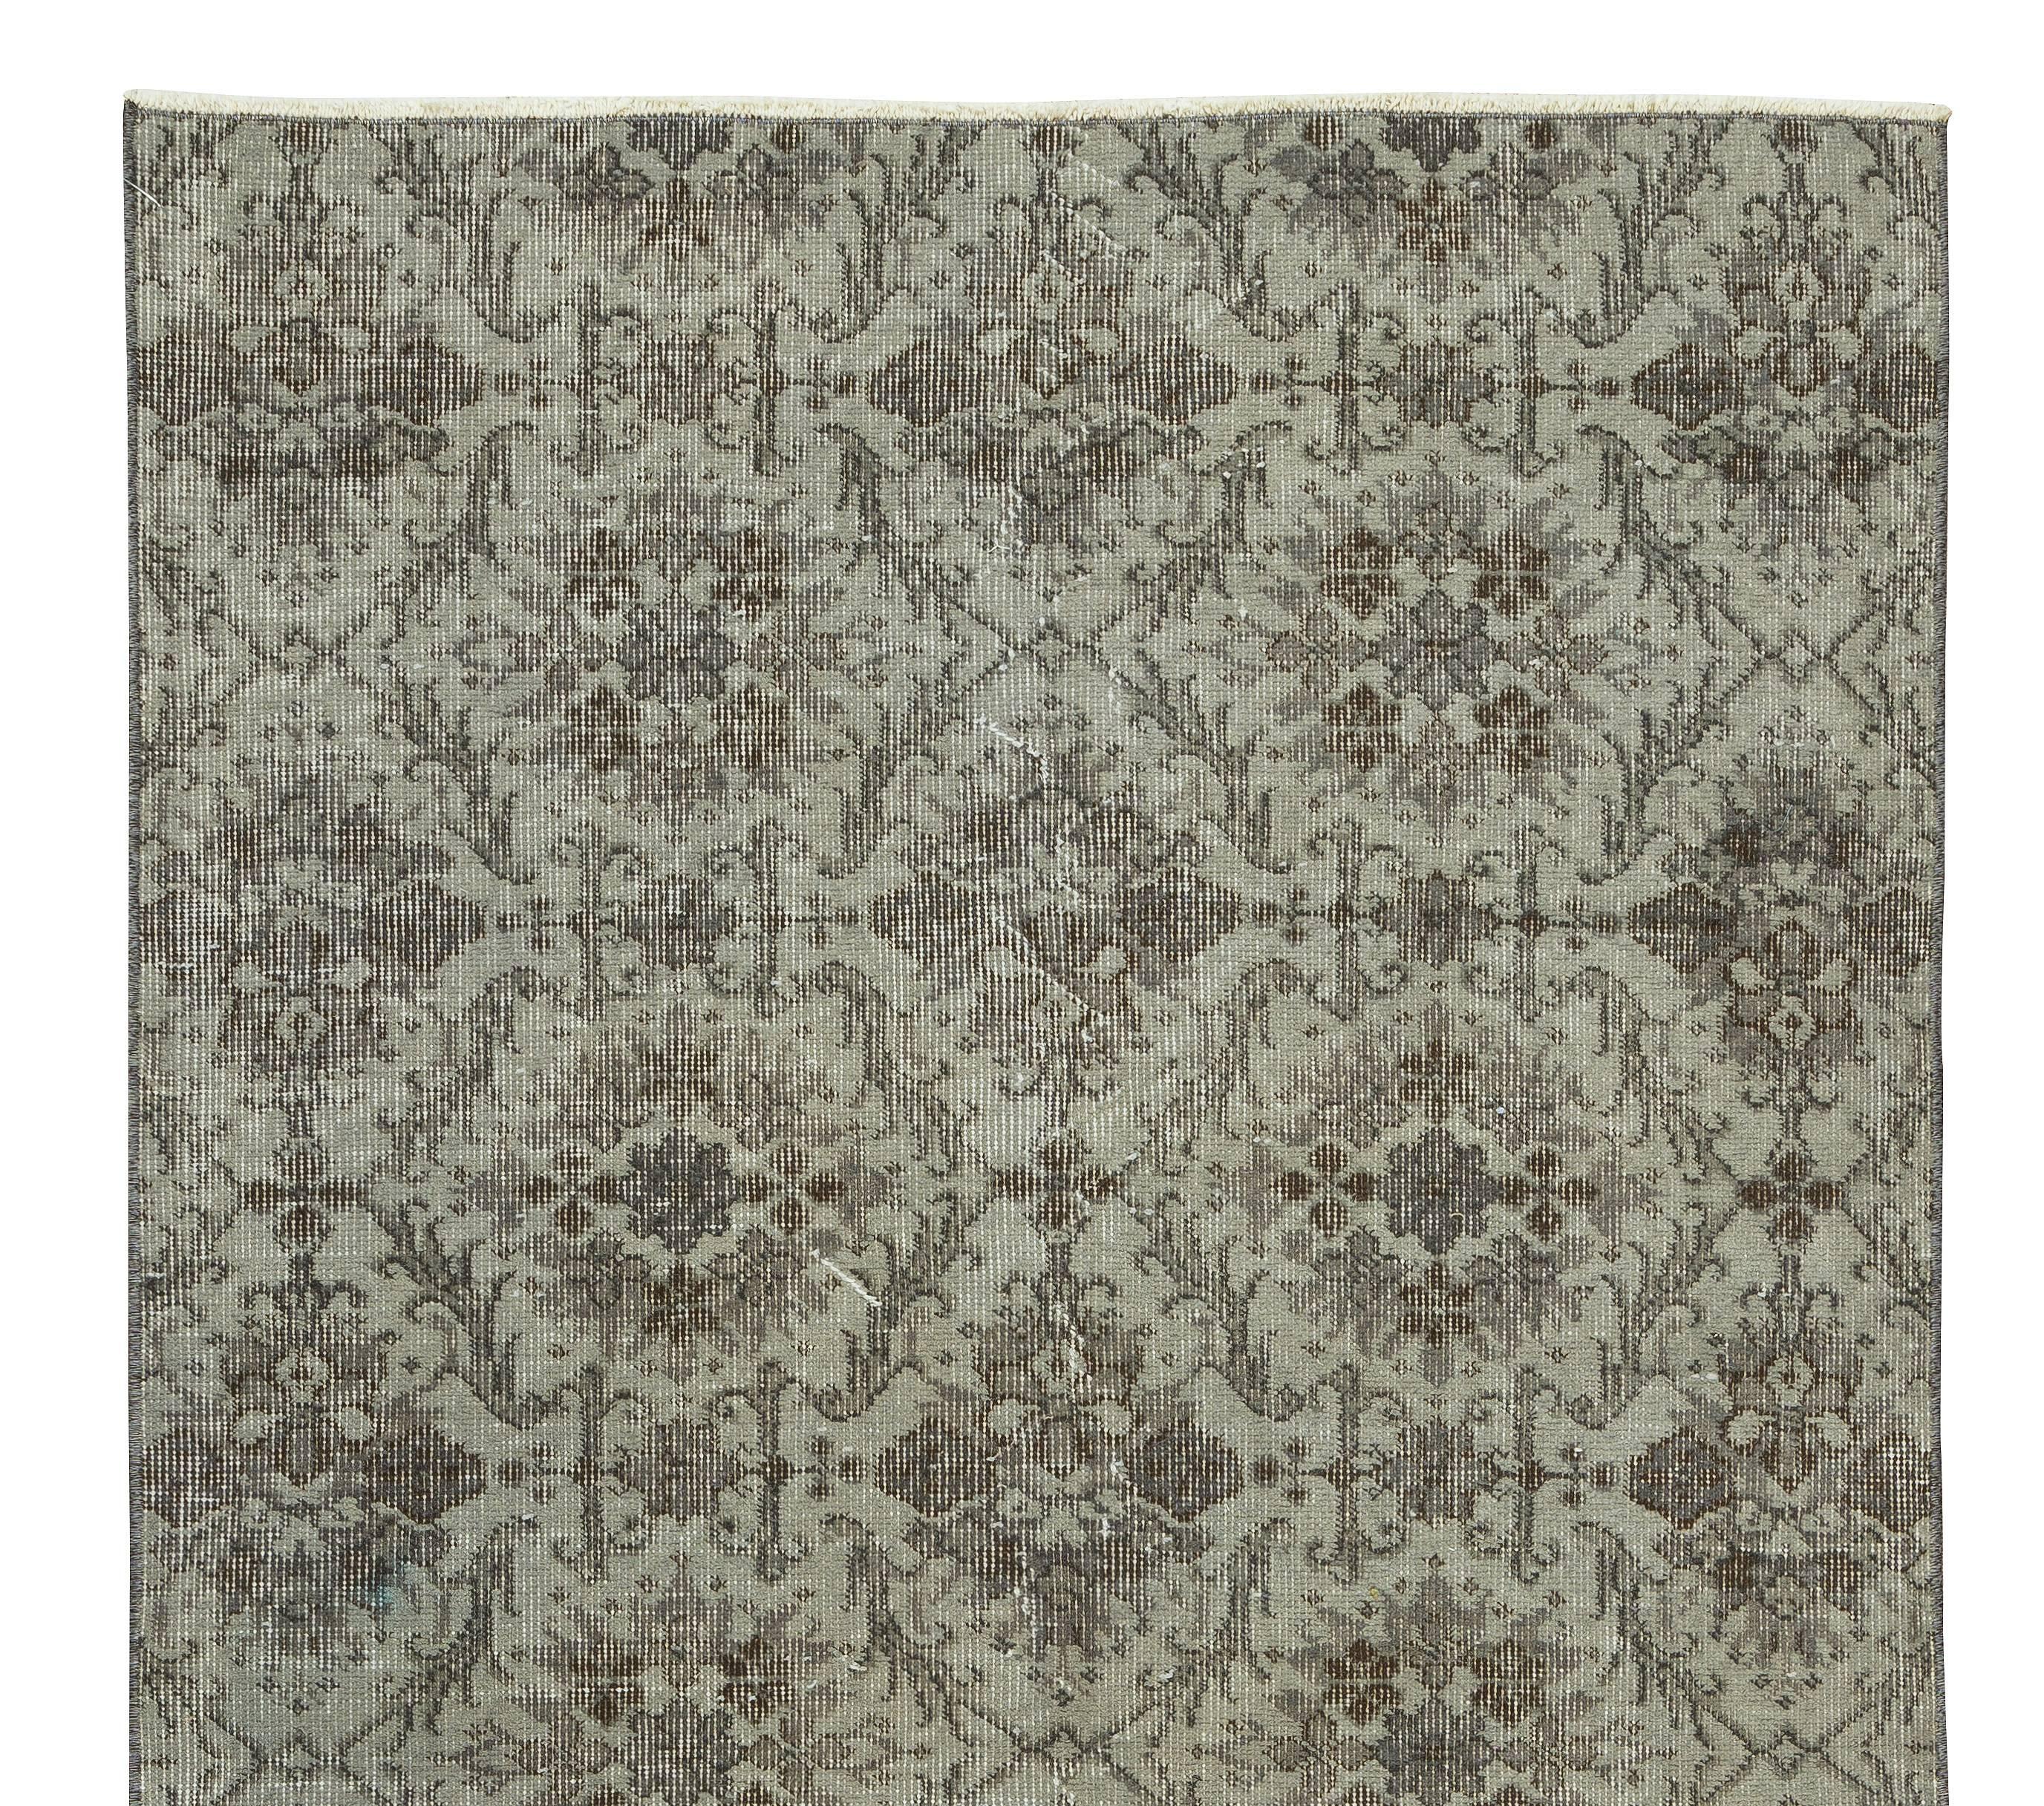 Hand-Woven Vintage Handmade Turkish Deco Wool Rug, Floral Pattern Floor Covering For Sale